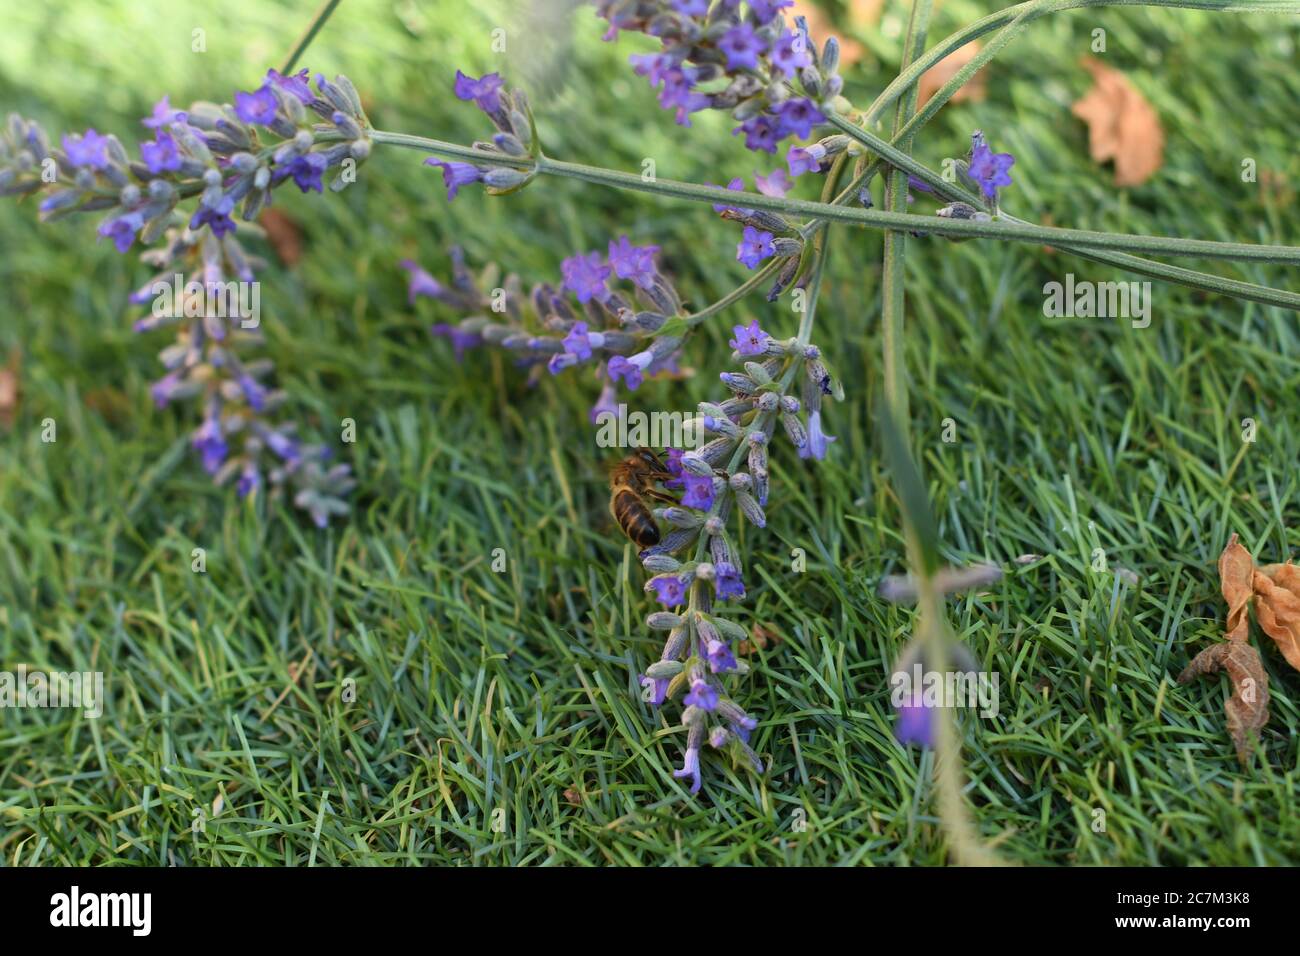 Bee gathering nectar from a lavender plant Stock Photo